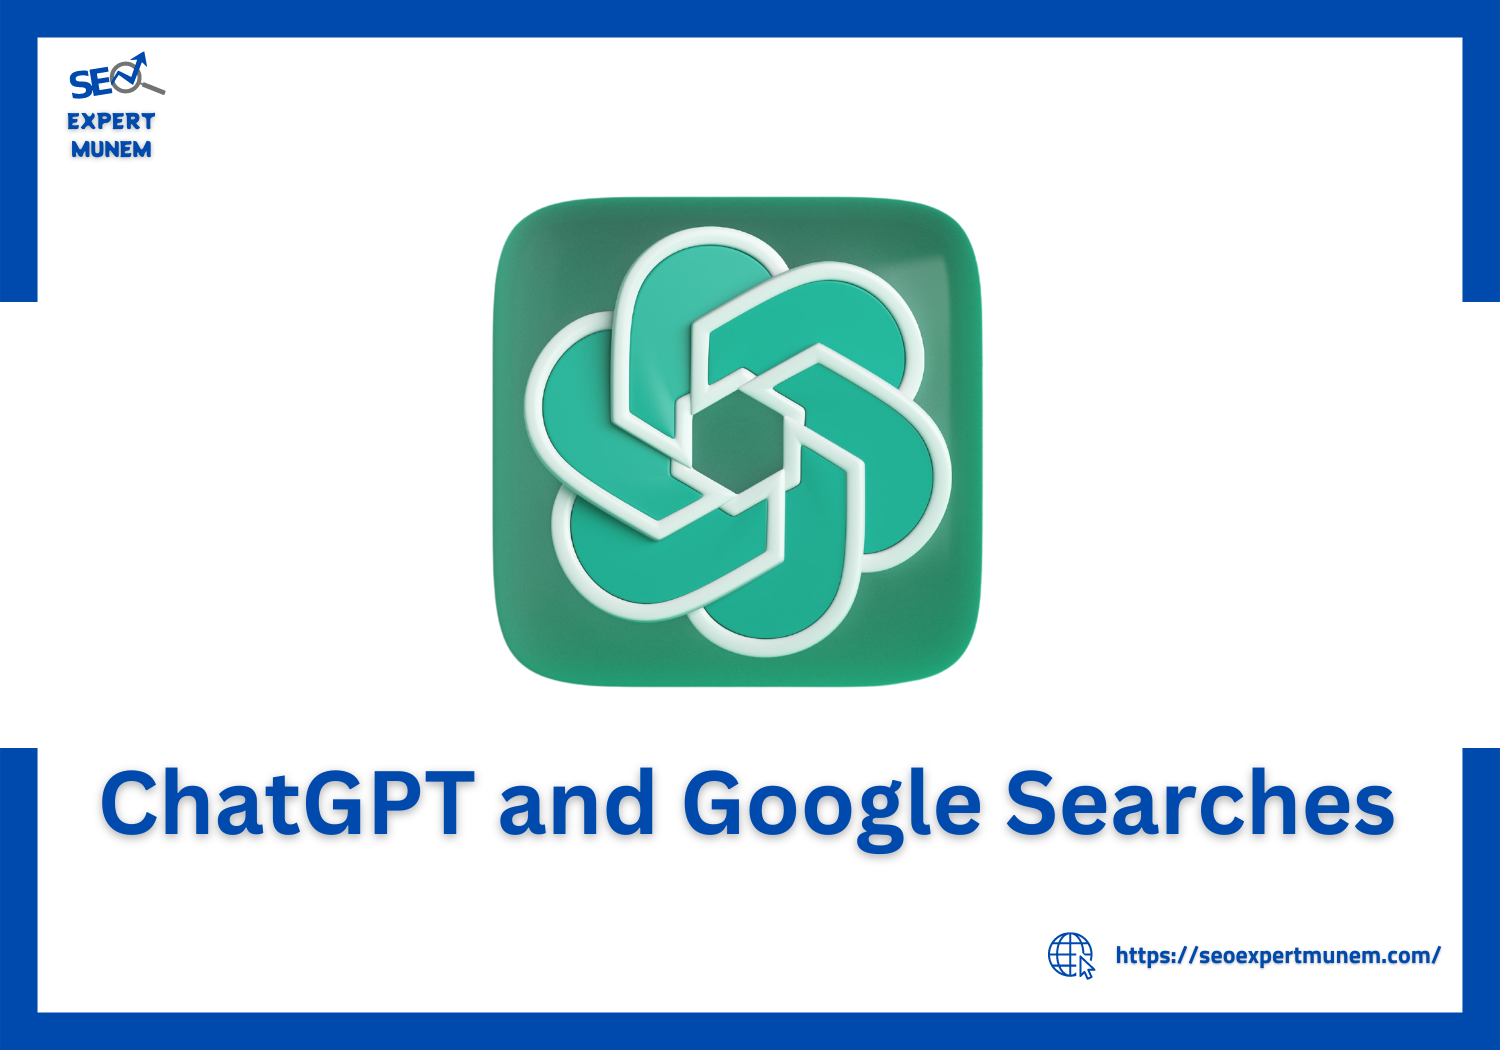 ChatGPT and Google Searches